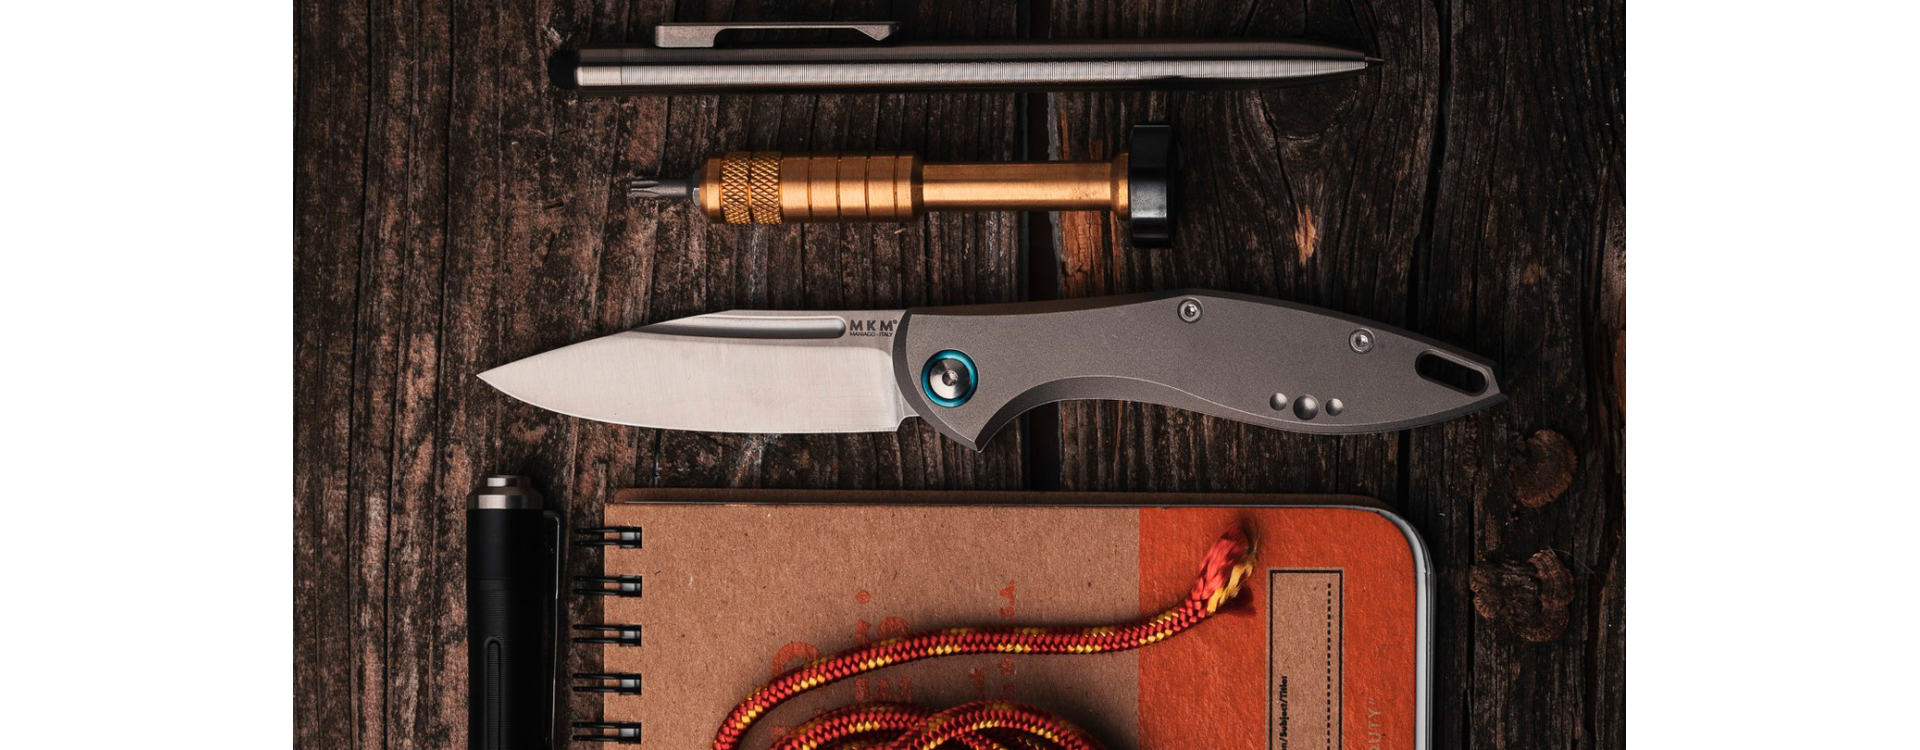 MKM knives - Maniago Knife Makers - are in stock